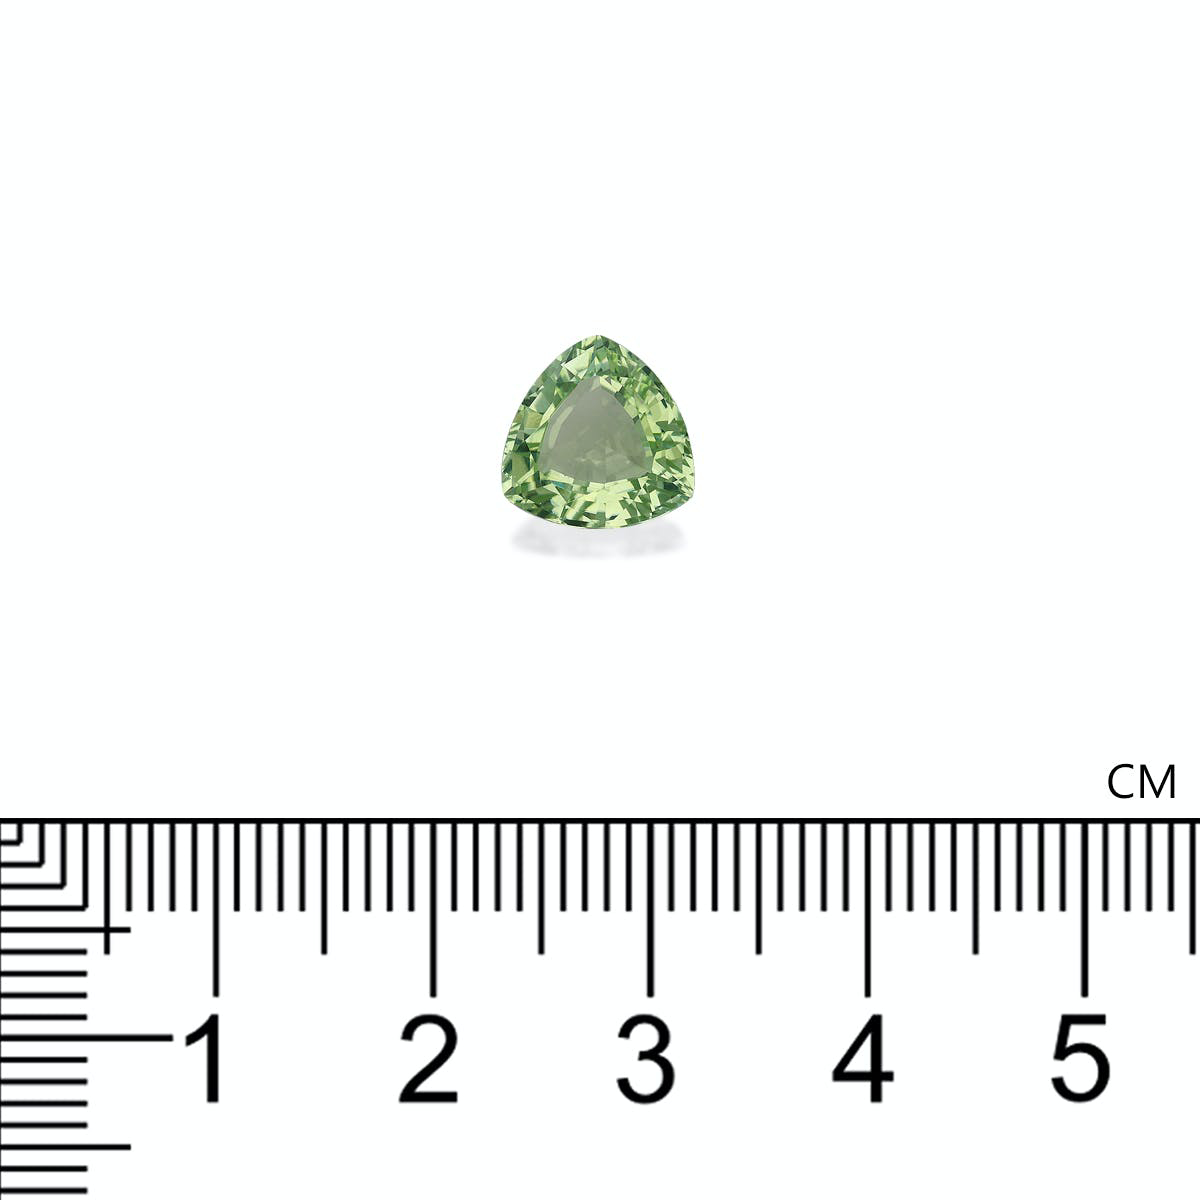 Picture of Lime Green Tourmaline 2.37ct - 9mm (TG1284)